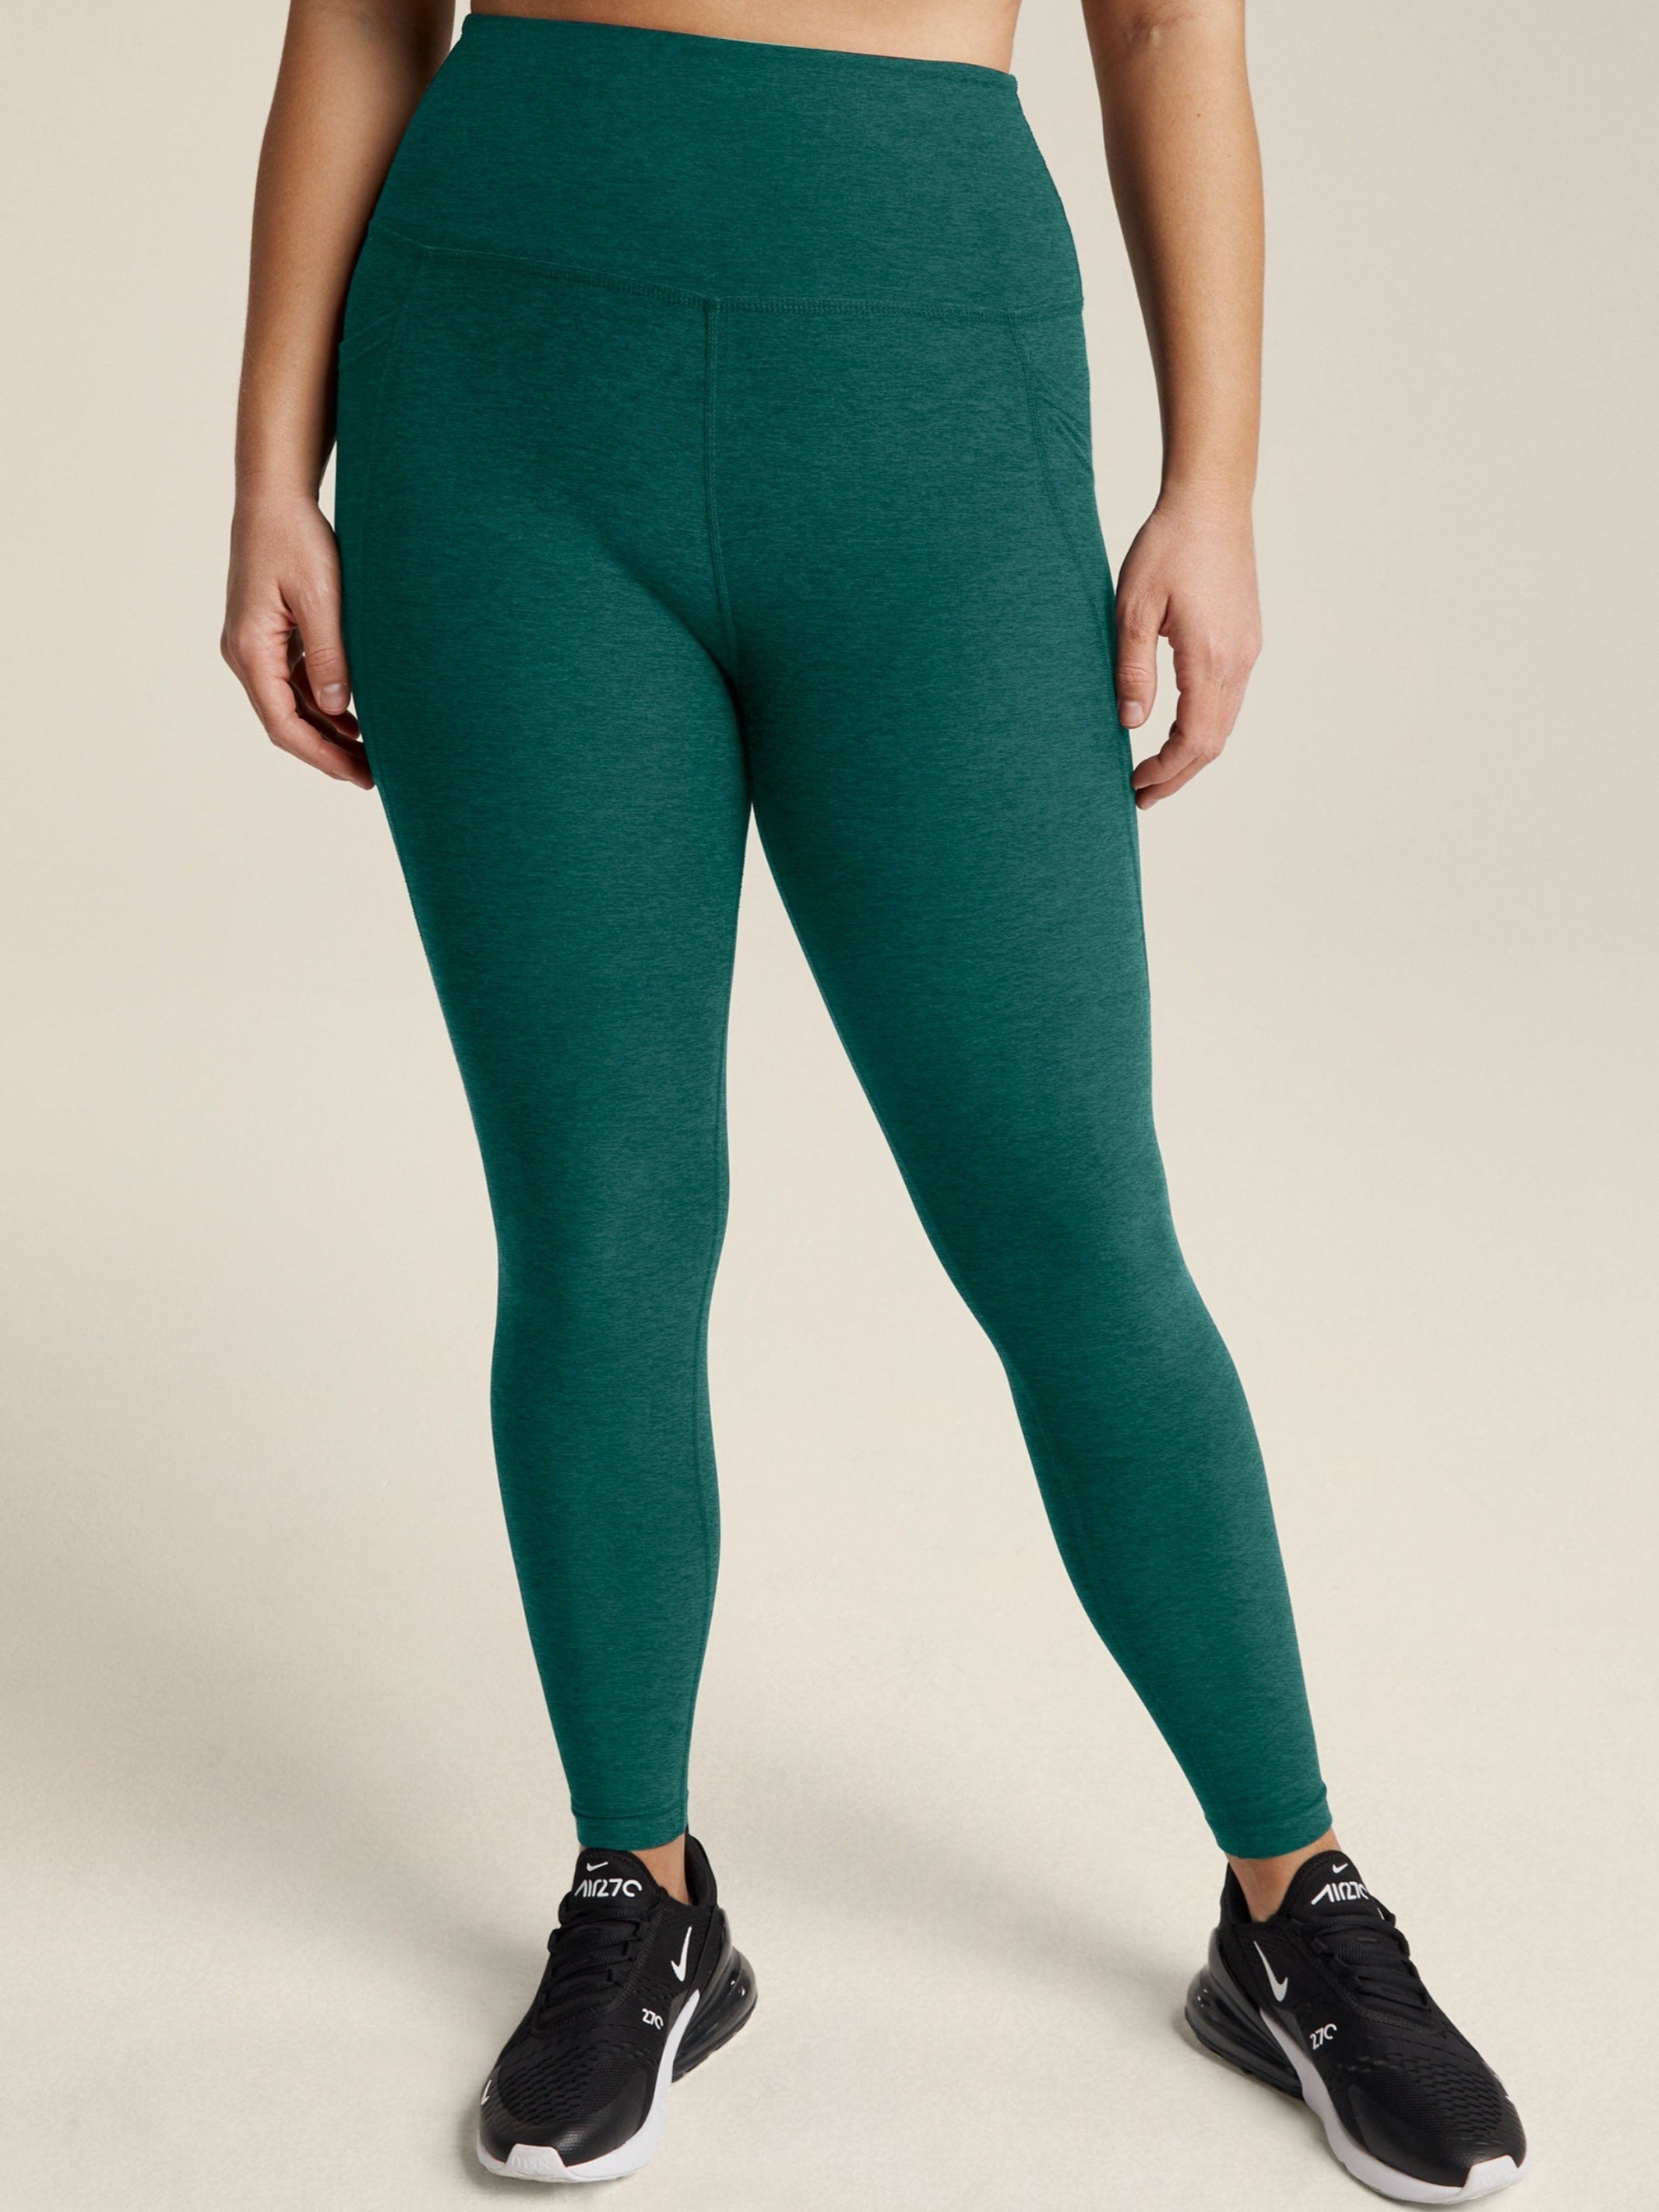 Spacedye Out Of Pocket High Waisted Midi Legging